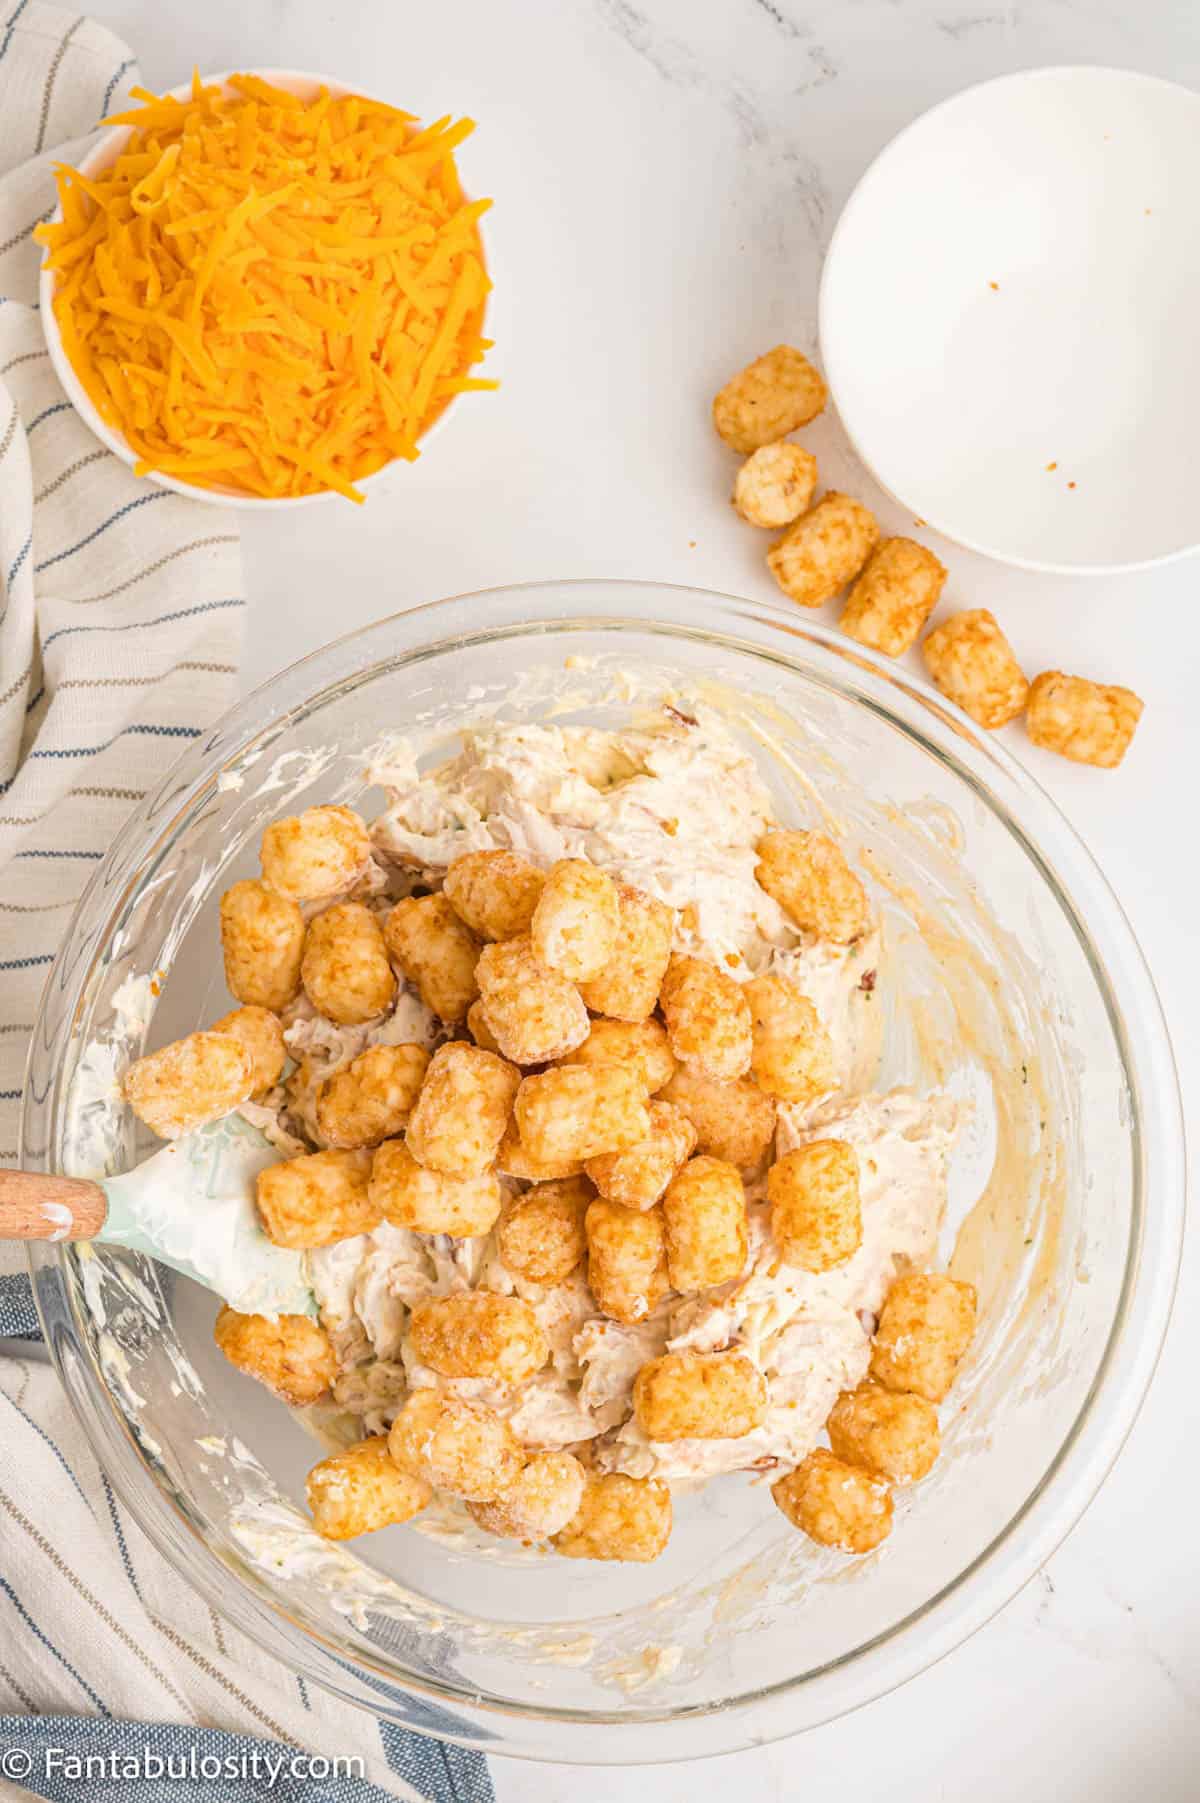 Frozen tater tots have been added to a glass mixing bowl with a creamy chicken mixture